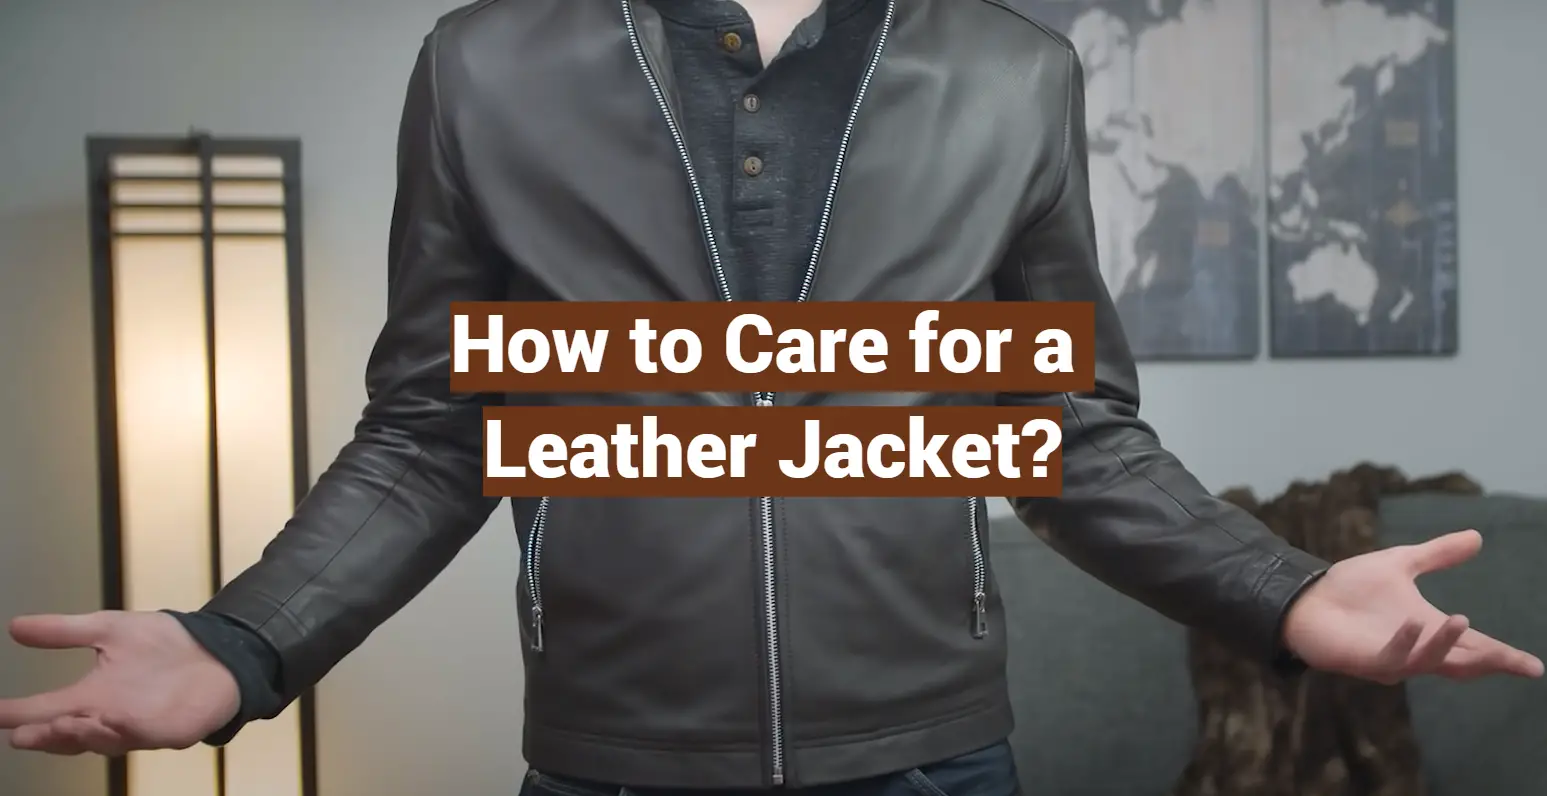 How to Care for a Leather Jacket?